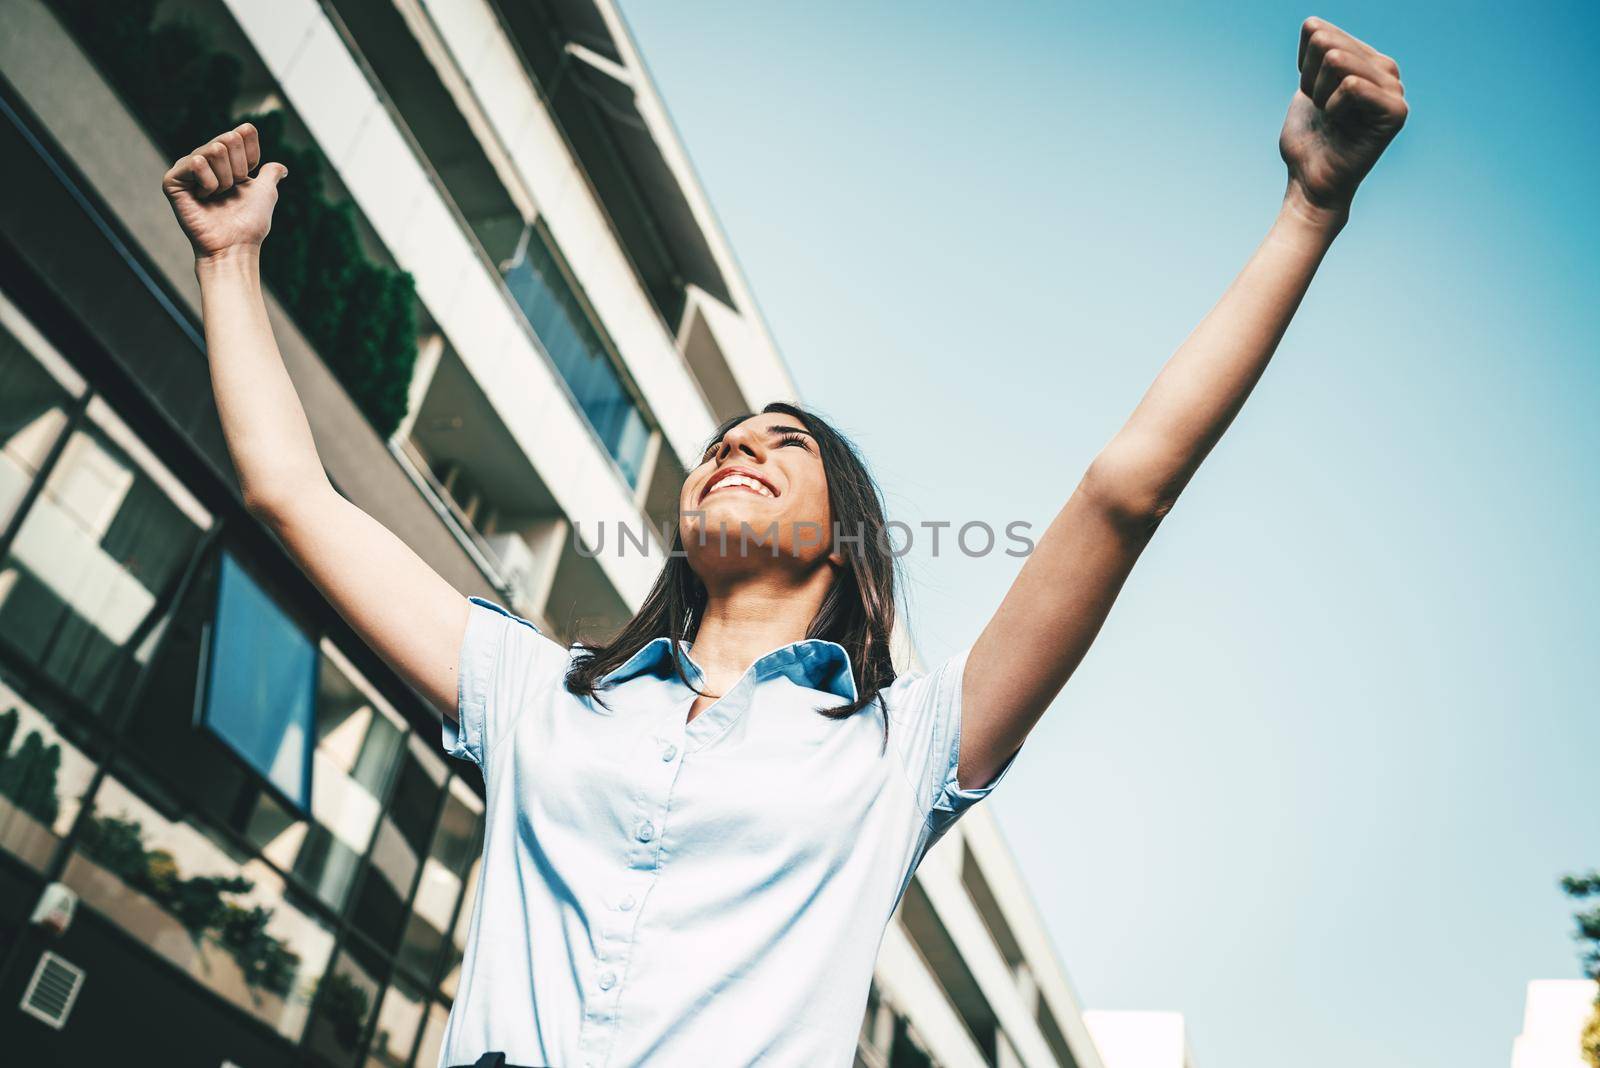 Emotional portrait of a happy and beautiful young businesswoman celebrating success arms raised on the background of a business center.